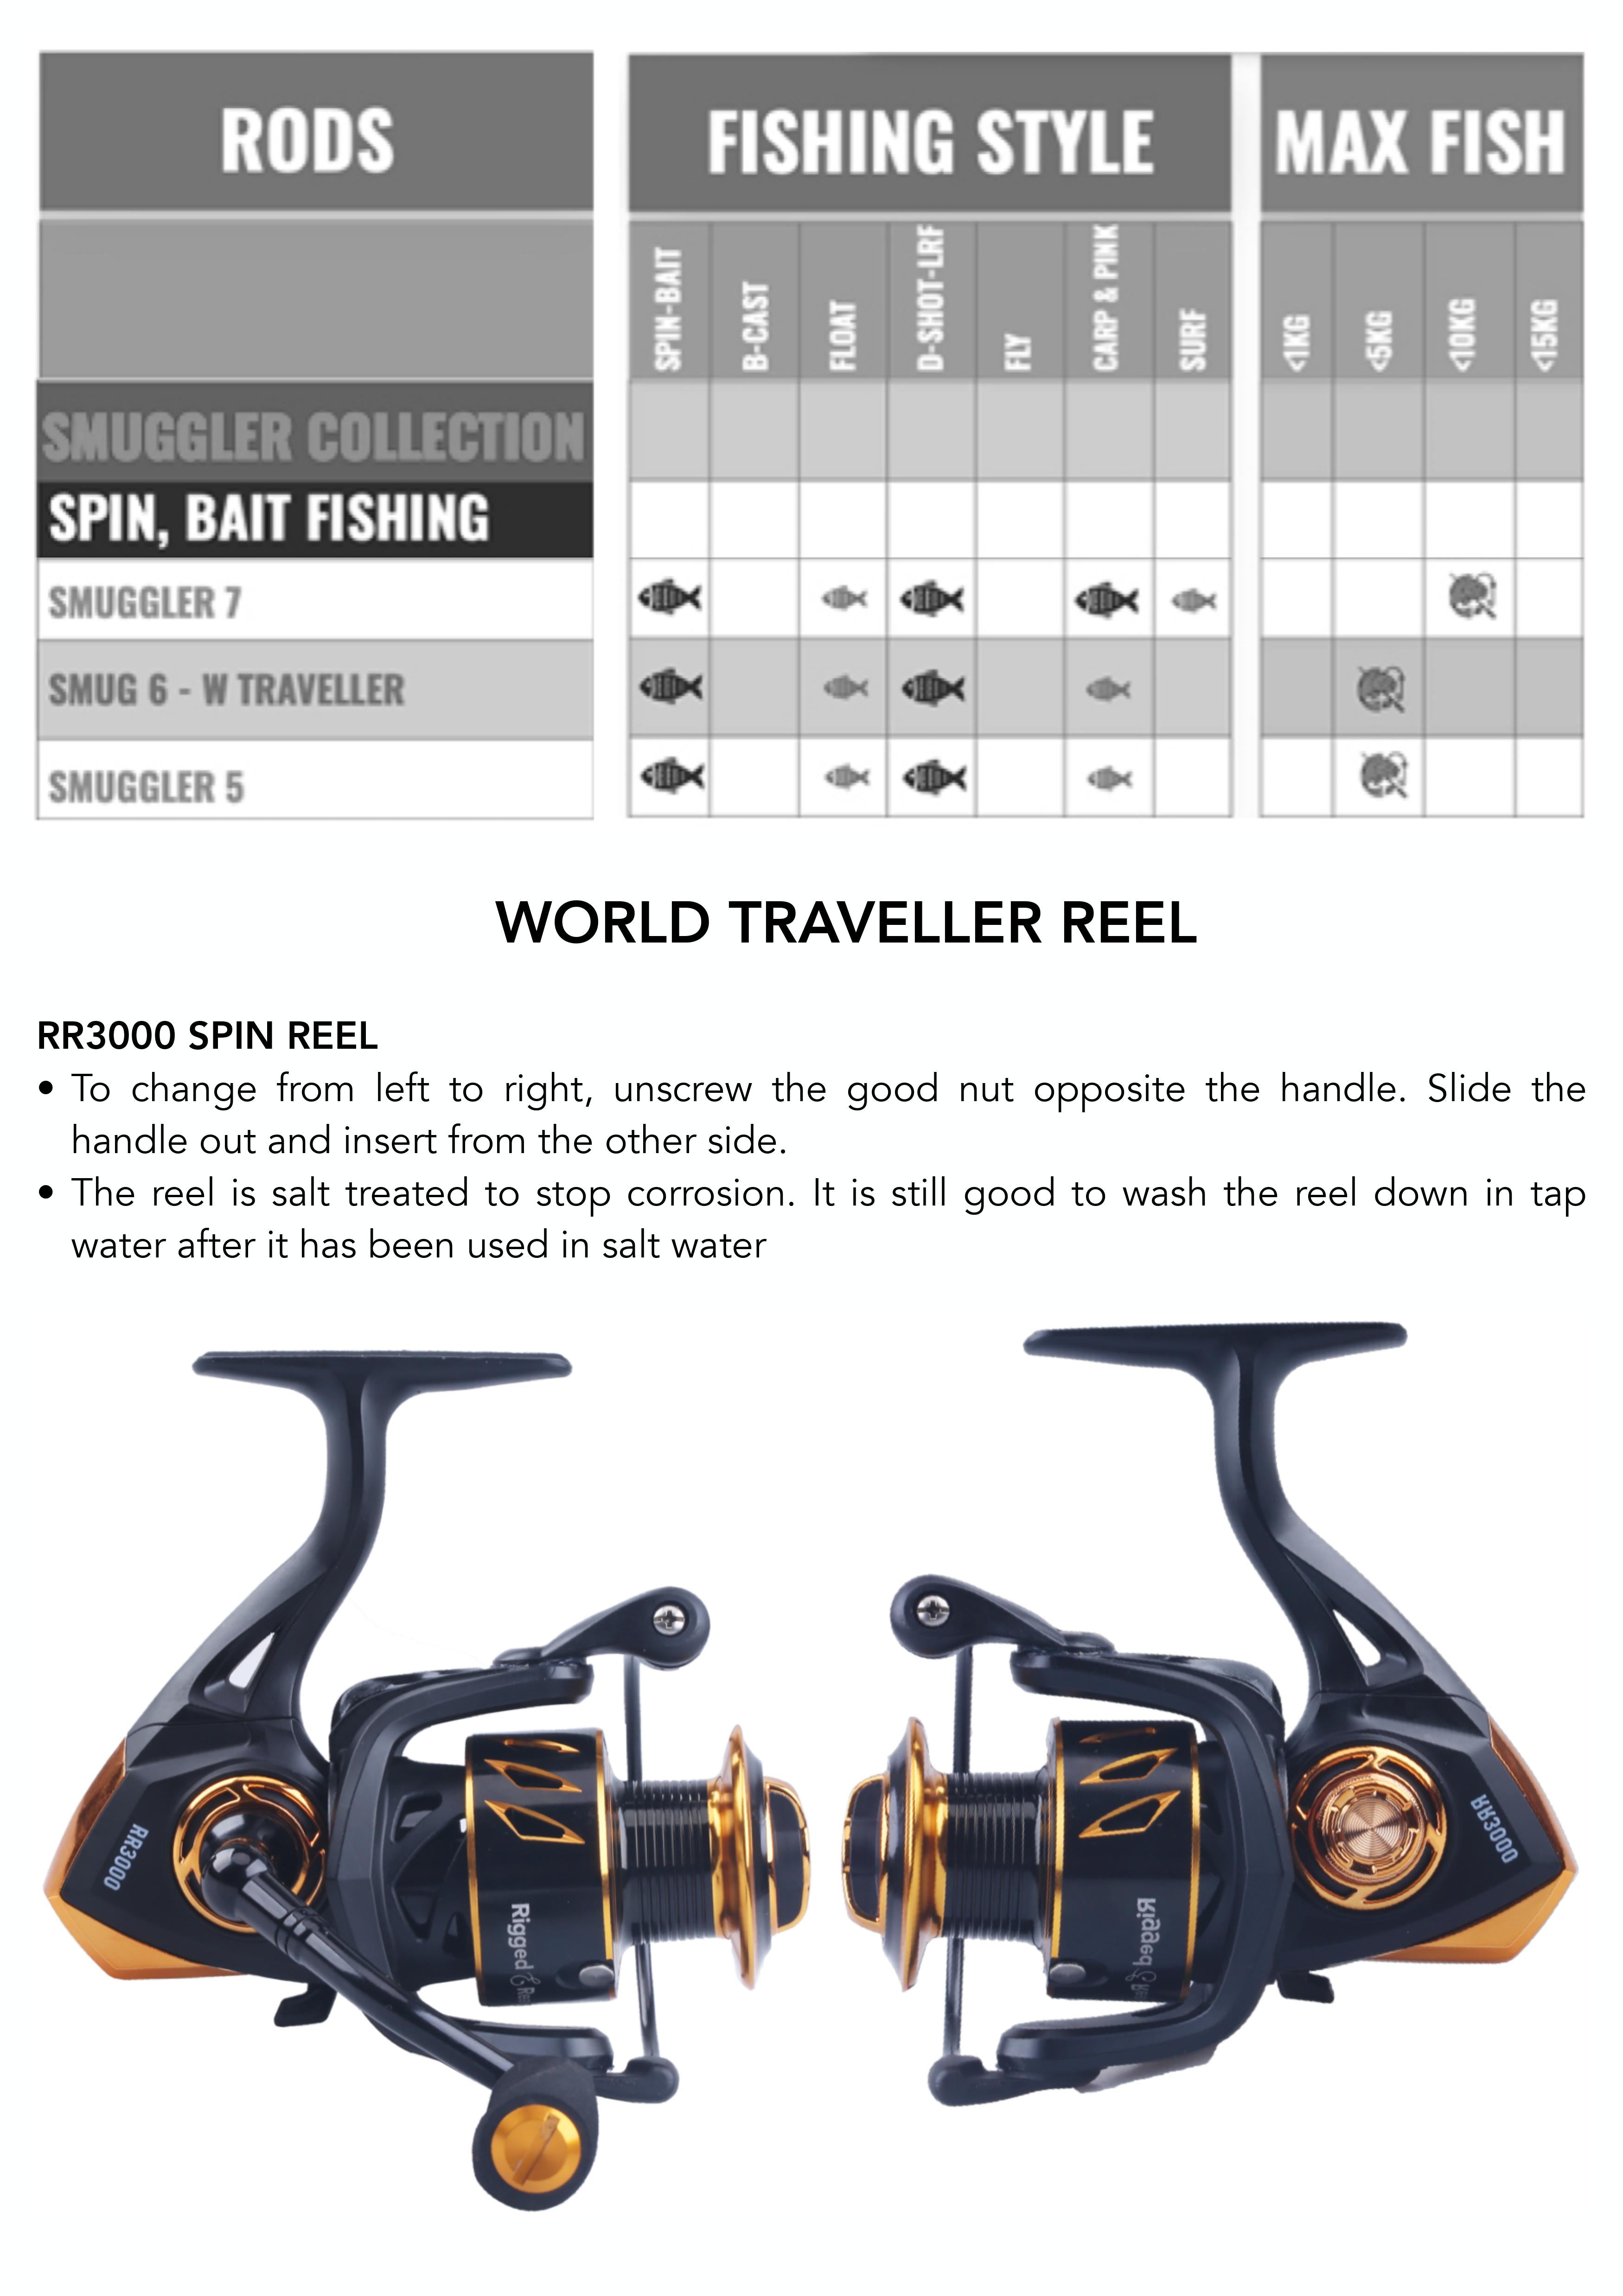 Fishing Pole User Guide – Rigged and Ready